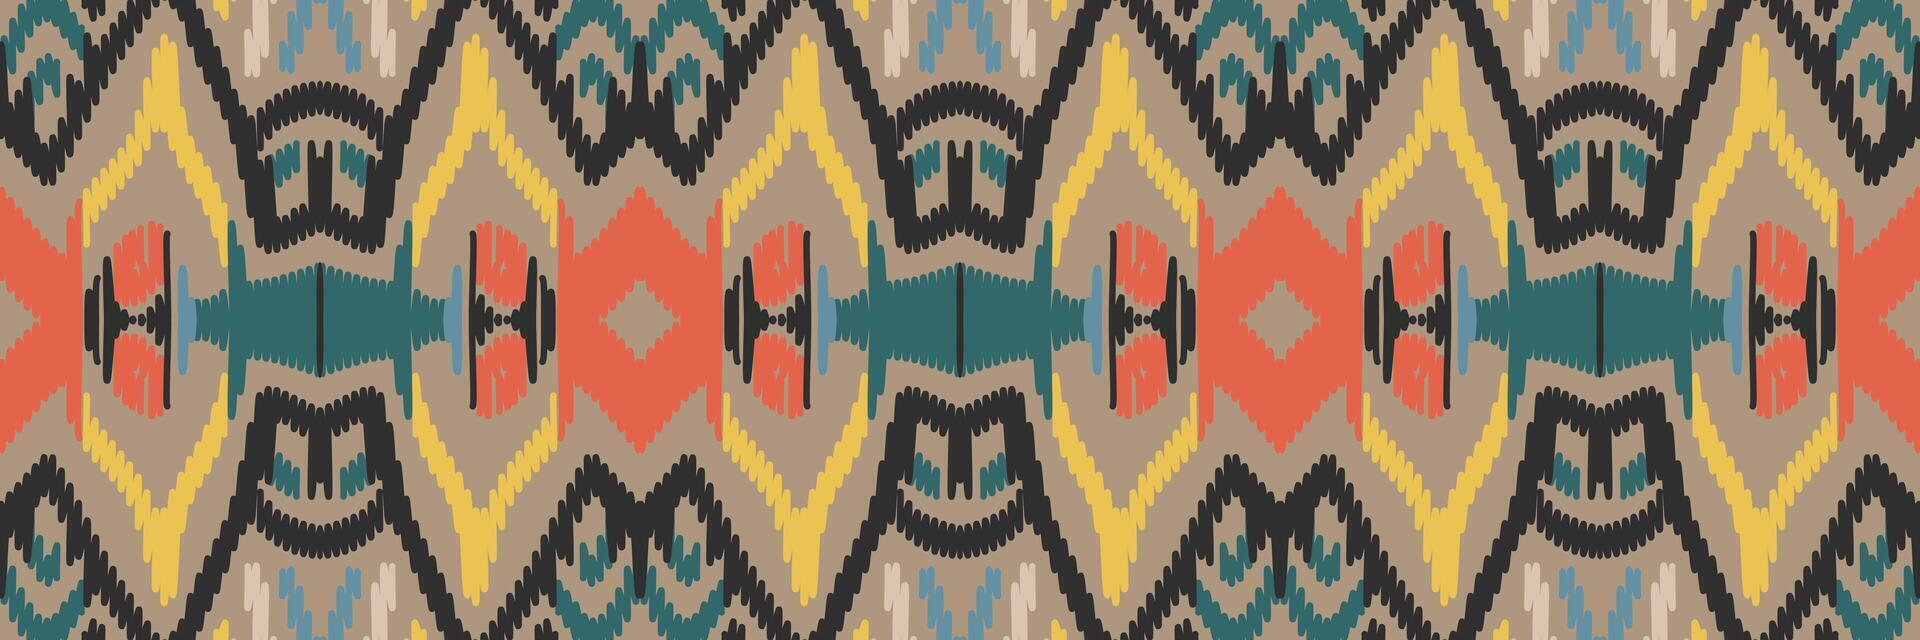 Ikat pattern in tribal. Geometric ethnic traditional. Mexican striped style. Design for background, wallpaper, vector illustration, fabric, clothing, batik, carpet, embroidery.